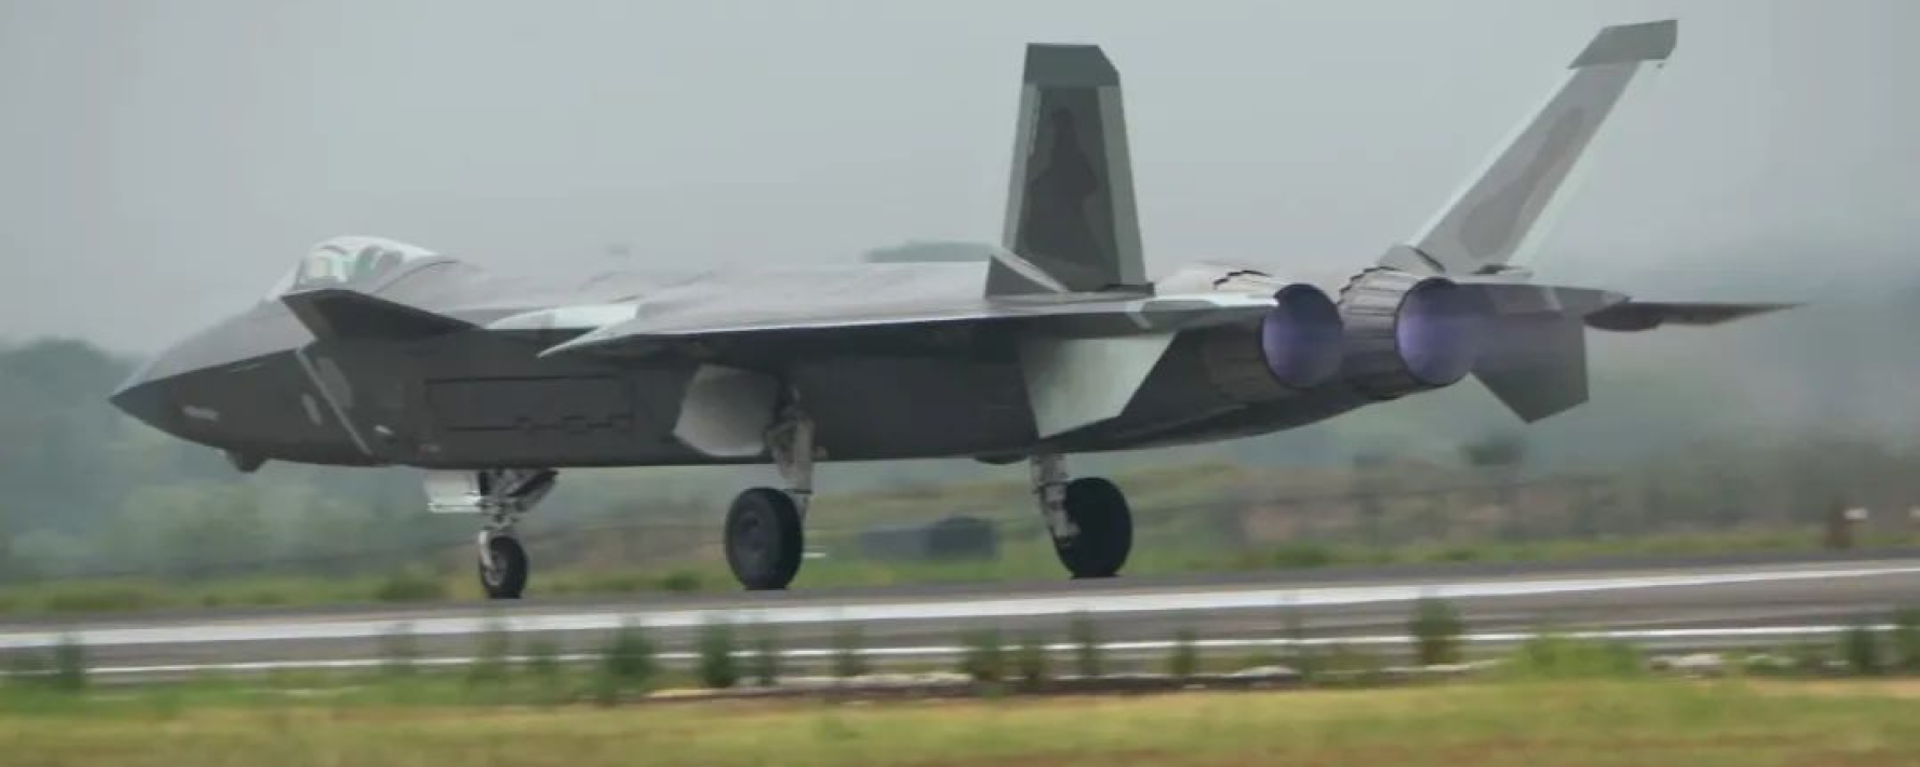 A J-20 stealth fighter of China's People's Liberation Army Air Force (PLAAF) takes part in drills near Taiwan on August 3, 2022. - Sputnik International, 1920, 20.01.2023